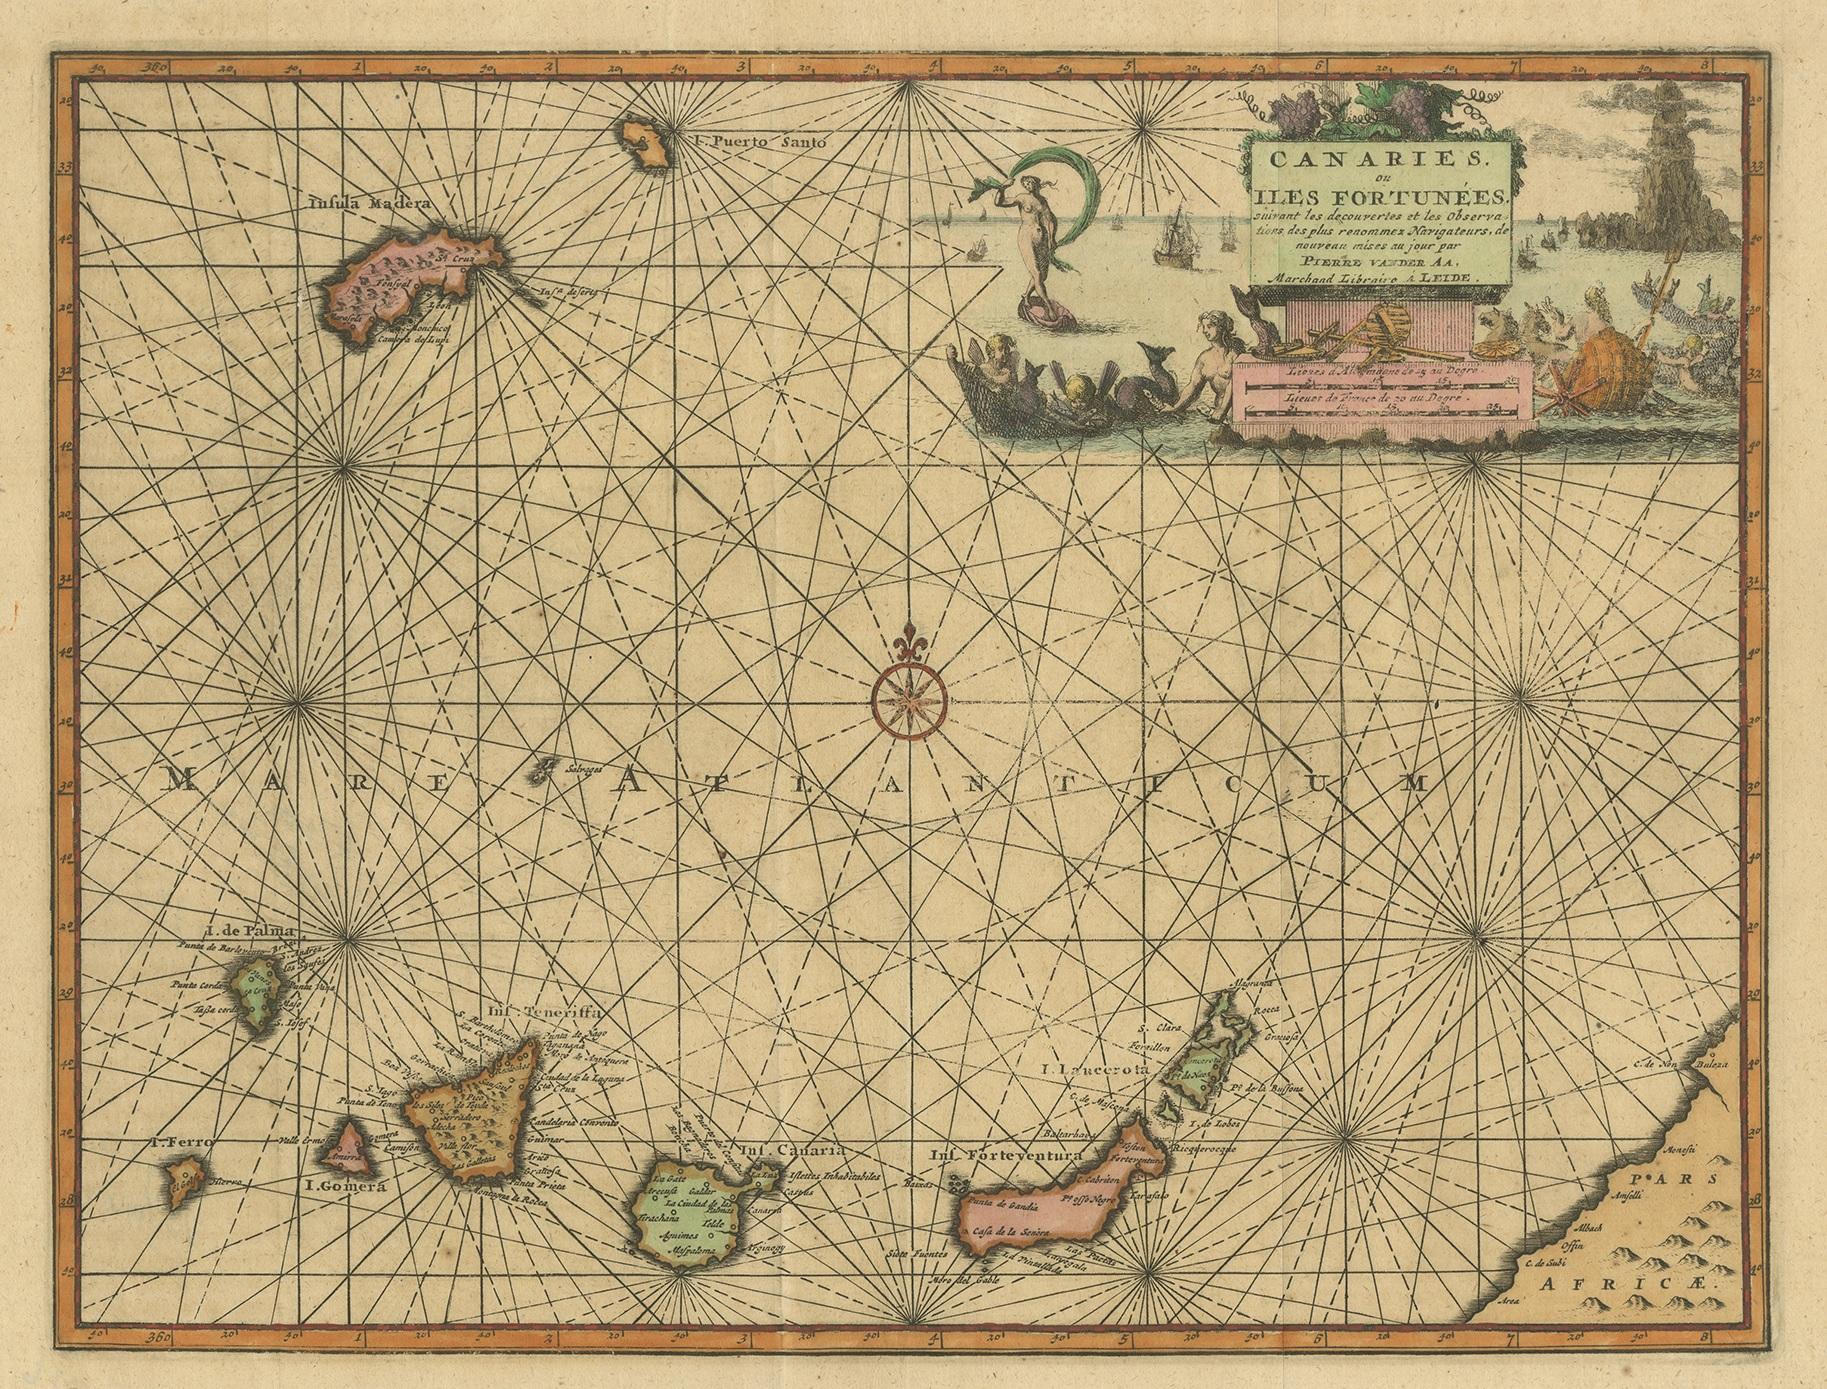 Antique map titled 'Canaries ou Iles Fortunee'. Chart of the Canary Islands (former Fortune Islands), situated off the northwest coast of Africa. Published by P. van der Aa, circa 1720.